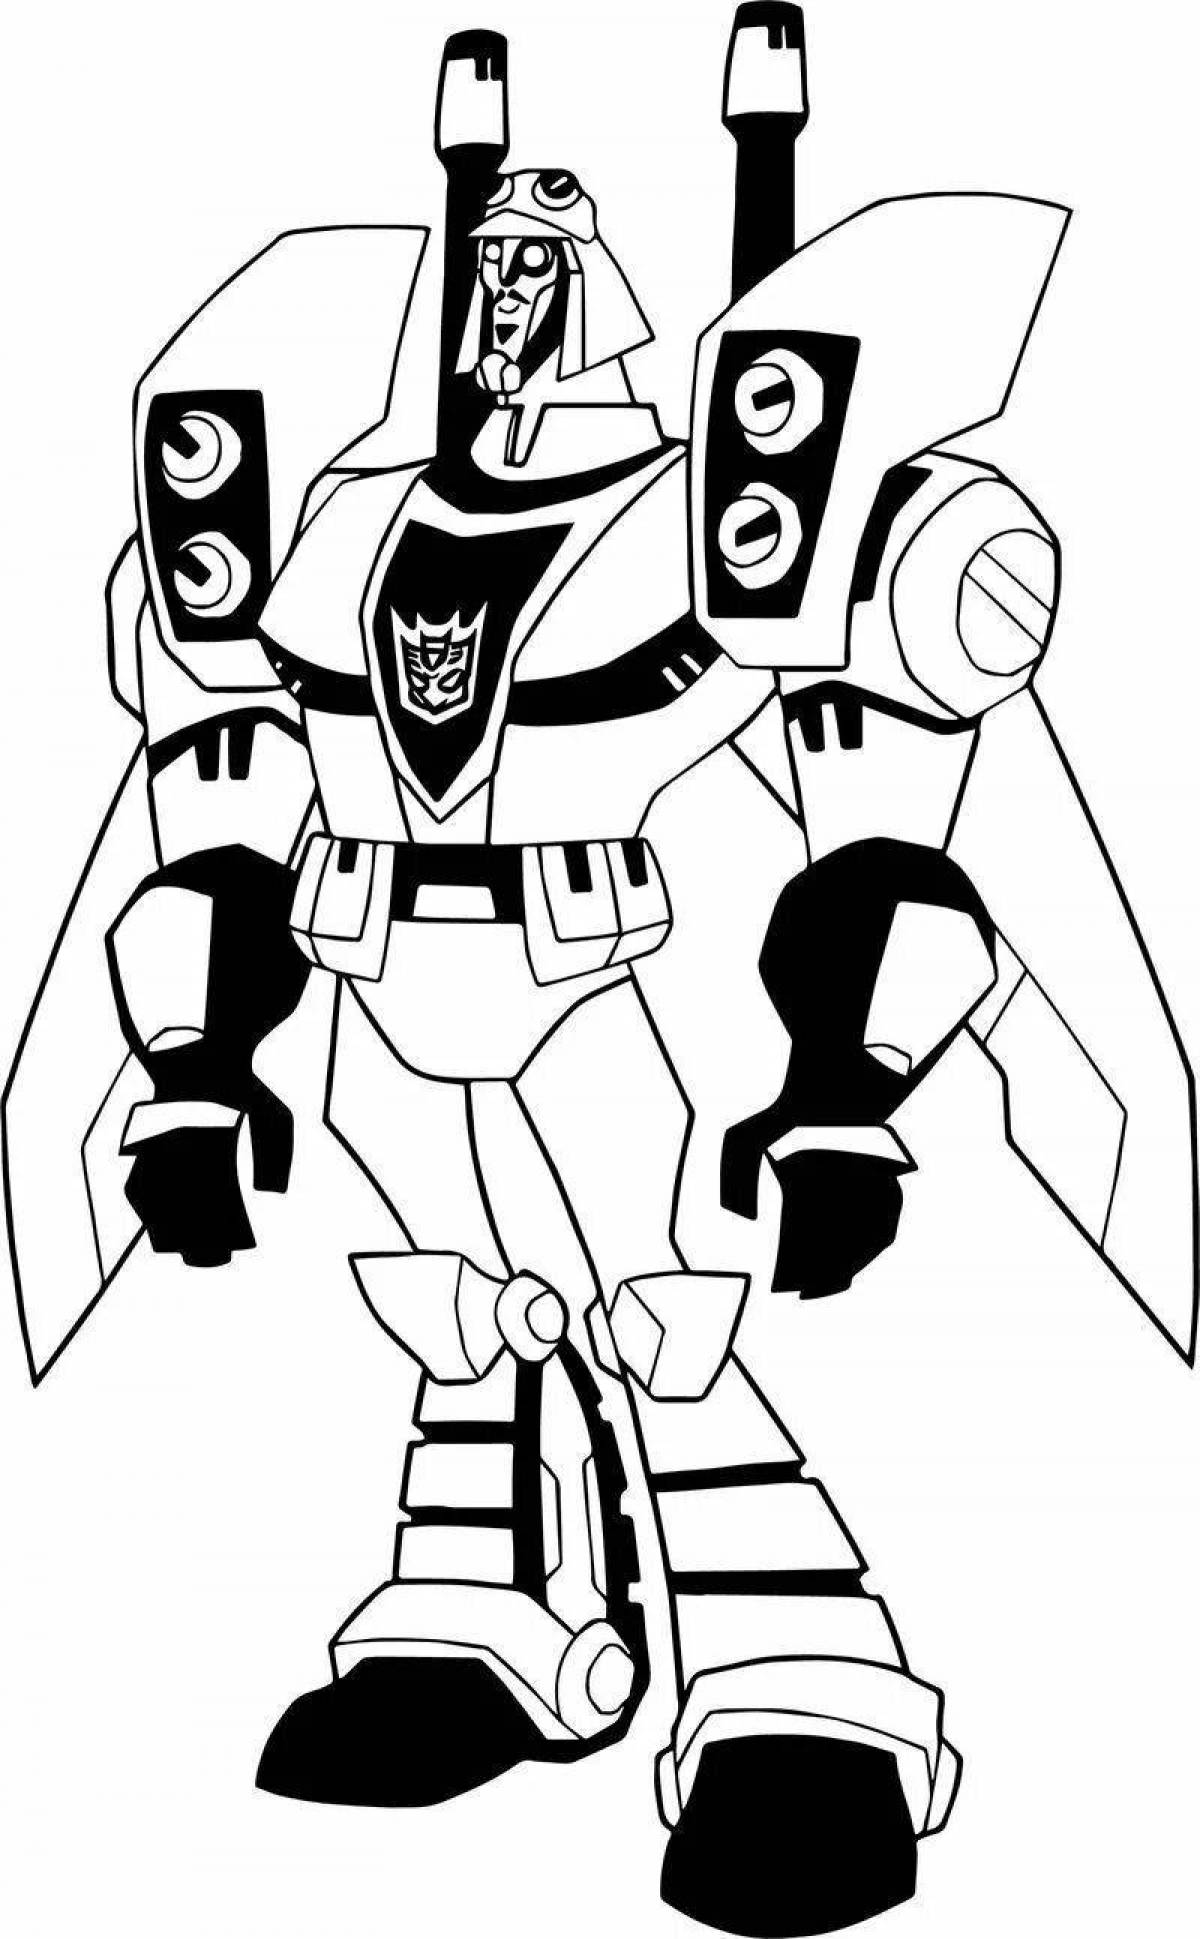 Fun coloring page of robot with siren head